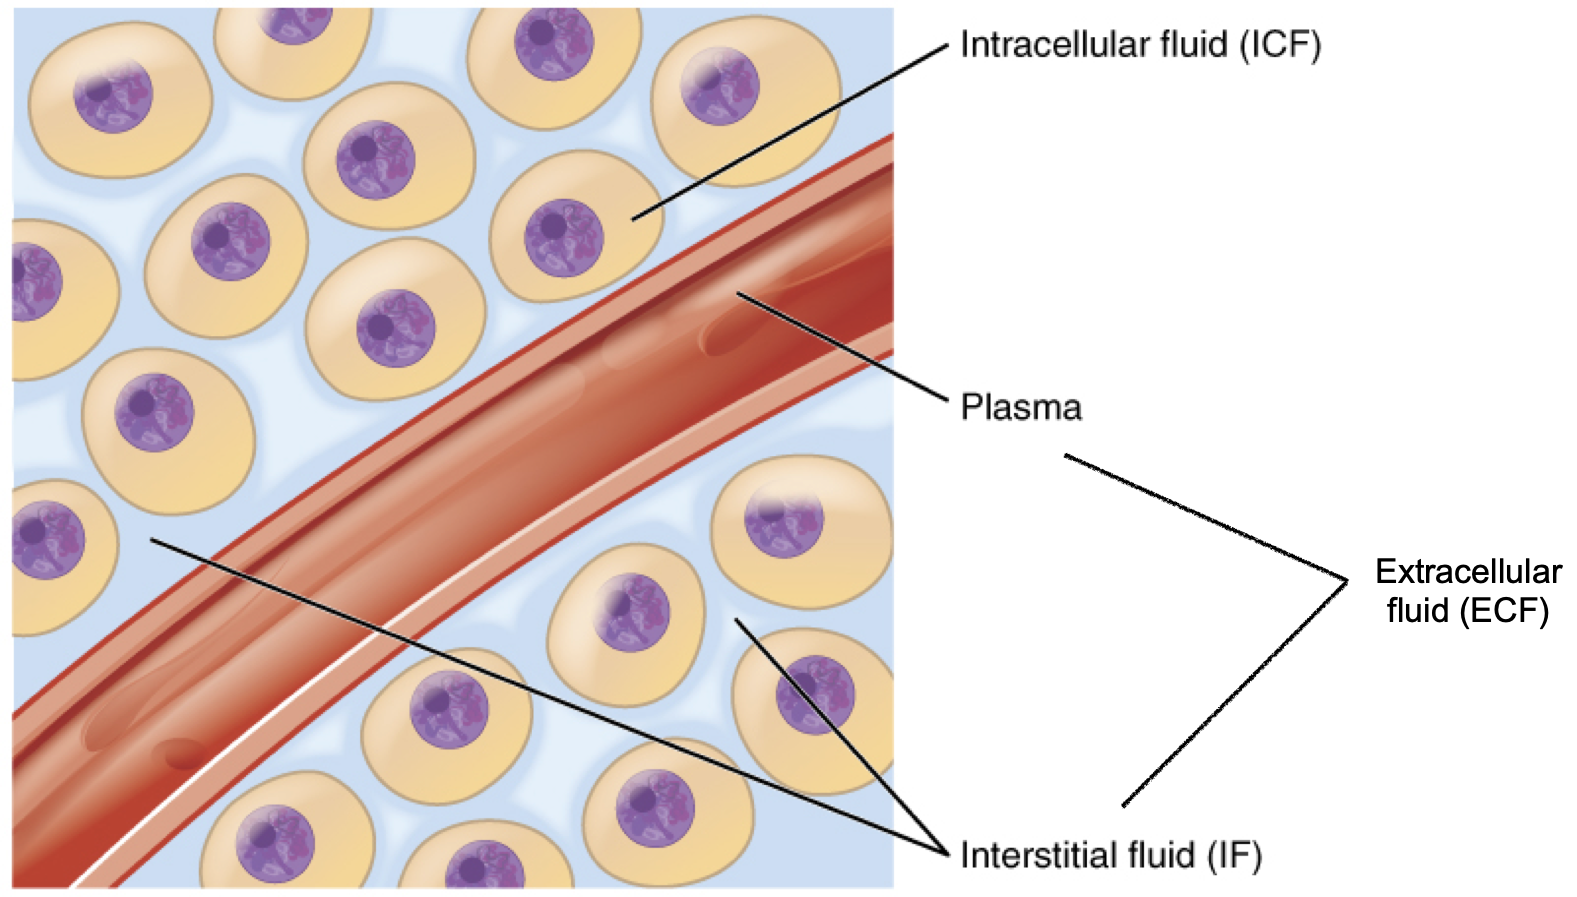 This diagram shows a small blood vessel surrounded by several body cells. The fluid between the body cells is the interstitial fluid (IF), which is a type of extracellular fluid (ECF). The fluid in the blood vessel is also an example of extracellular fluid. The fluid in the cytoplasm of each body cell is intracellular fluid, or ICF.